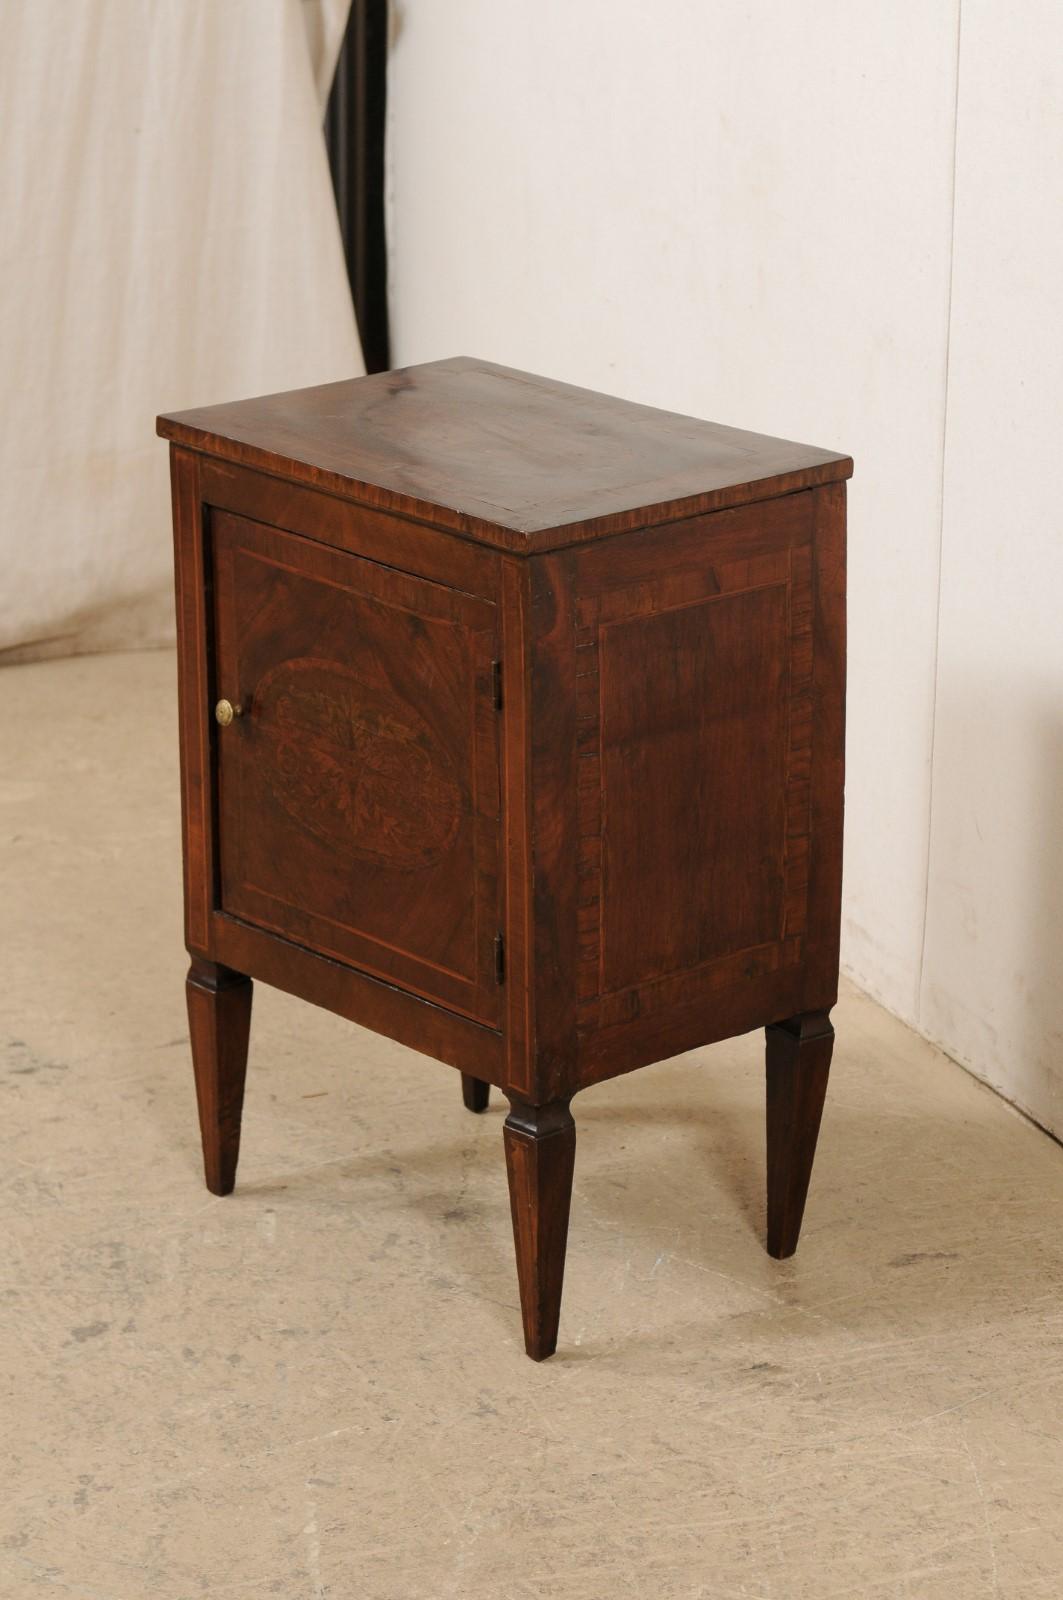 19th Century Early 19th C. Italian Small-Sized Neoclassical Cabinet w/Decorative Inlay For Sale